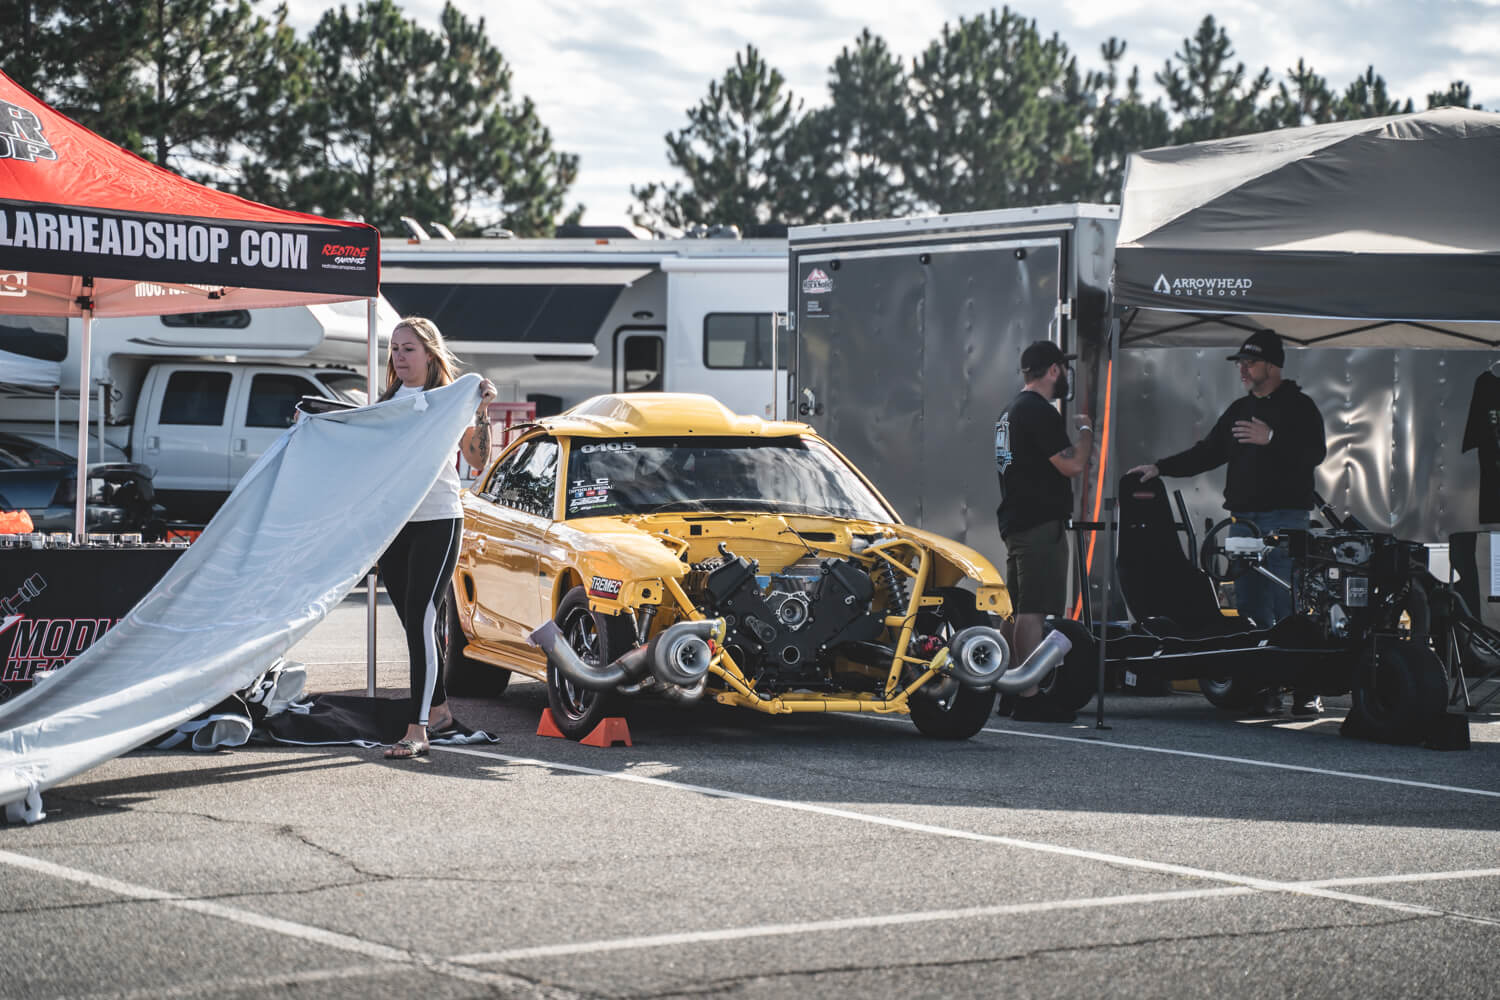 2021 Mod Nationals Twin Turbo Mustang Tear Down